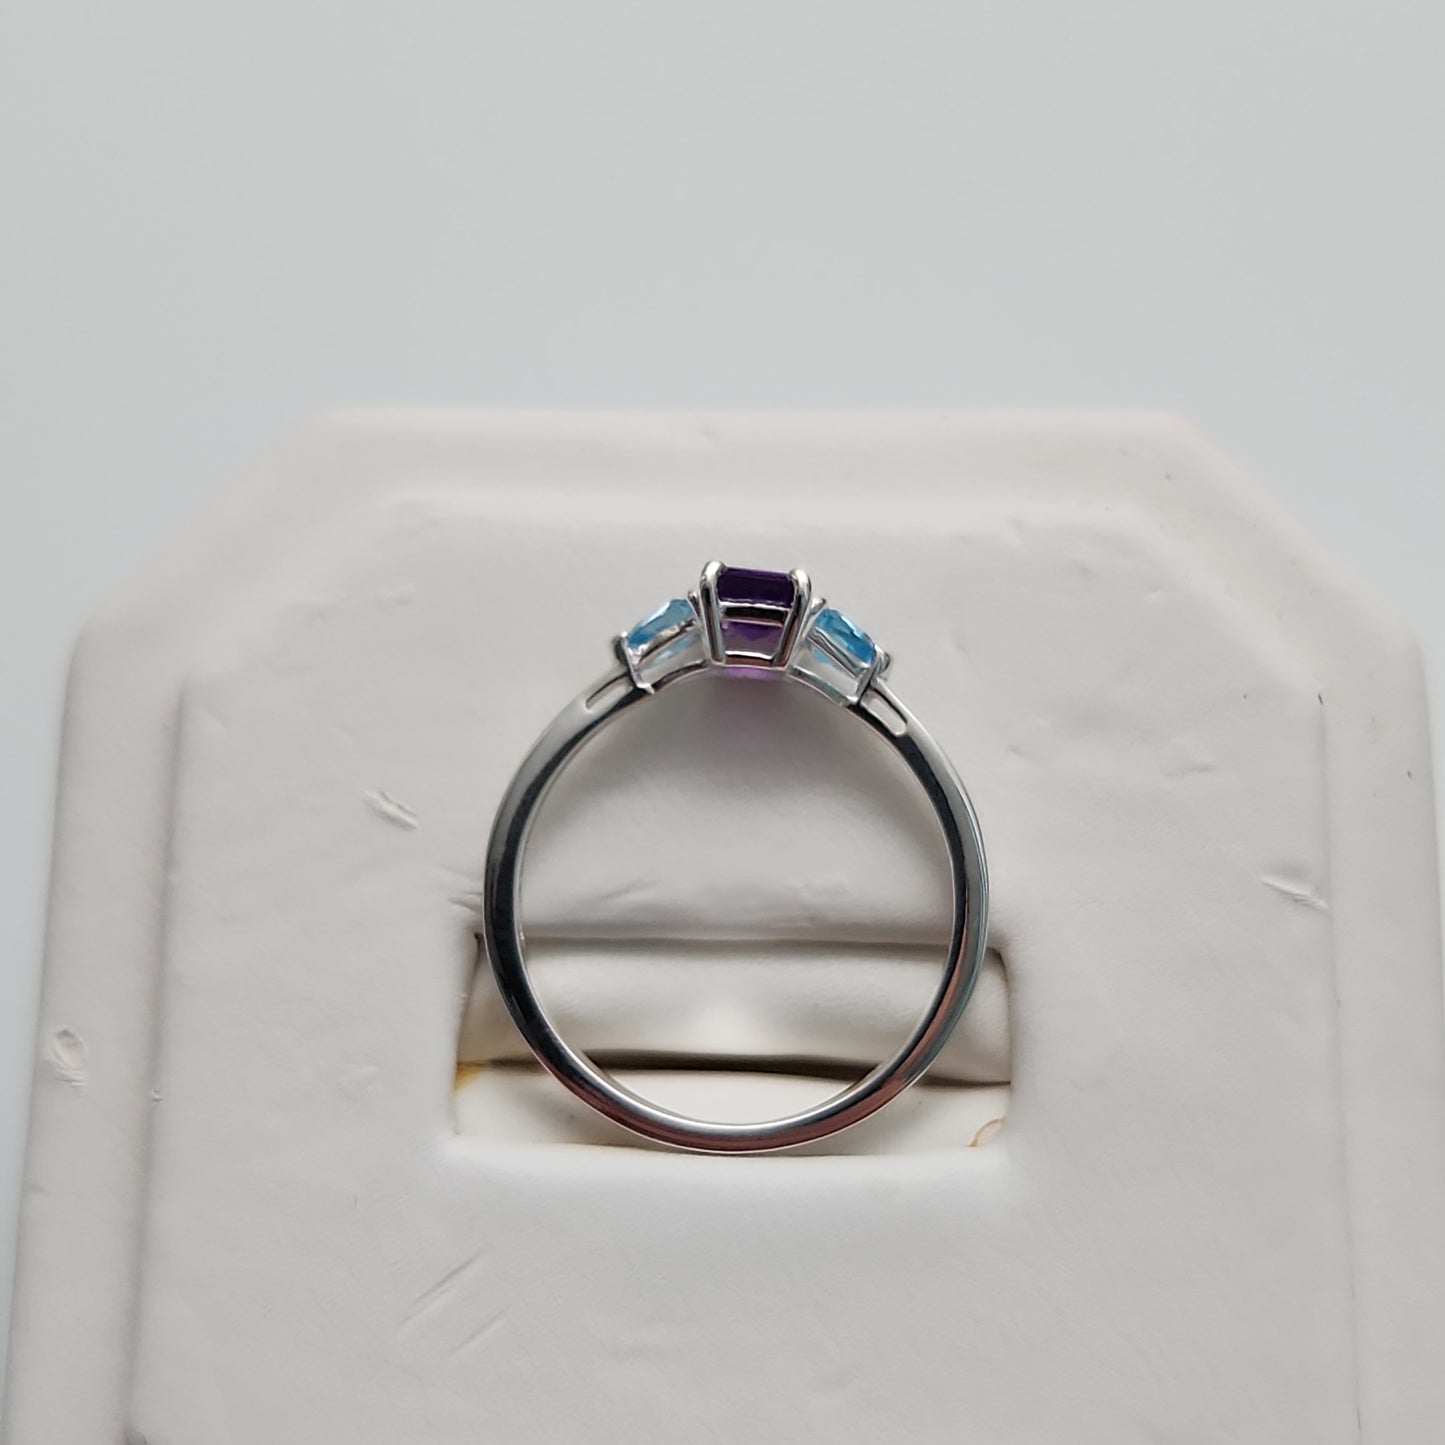 Amethyst and Blue Topaz ring